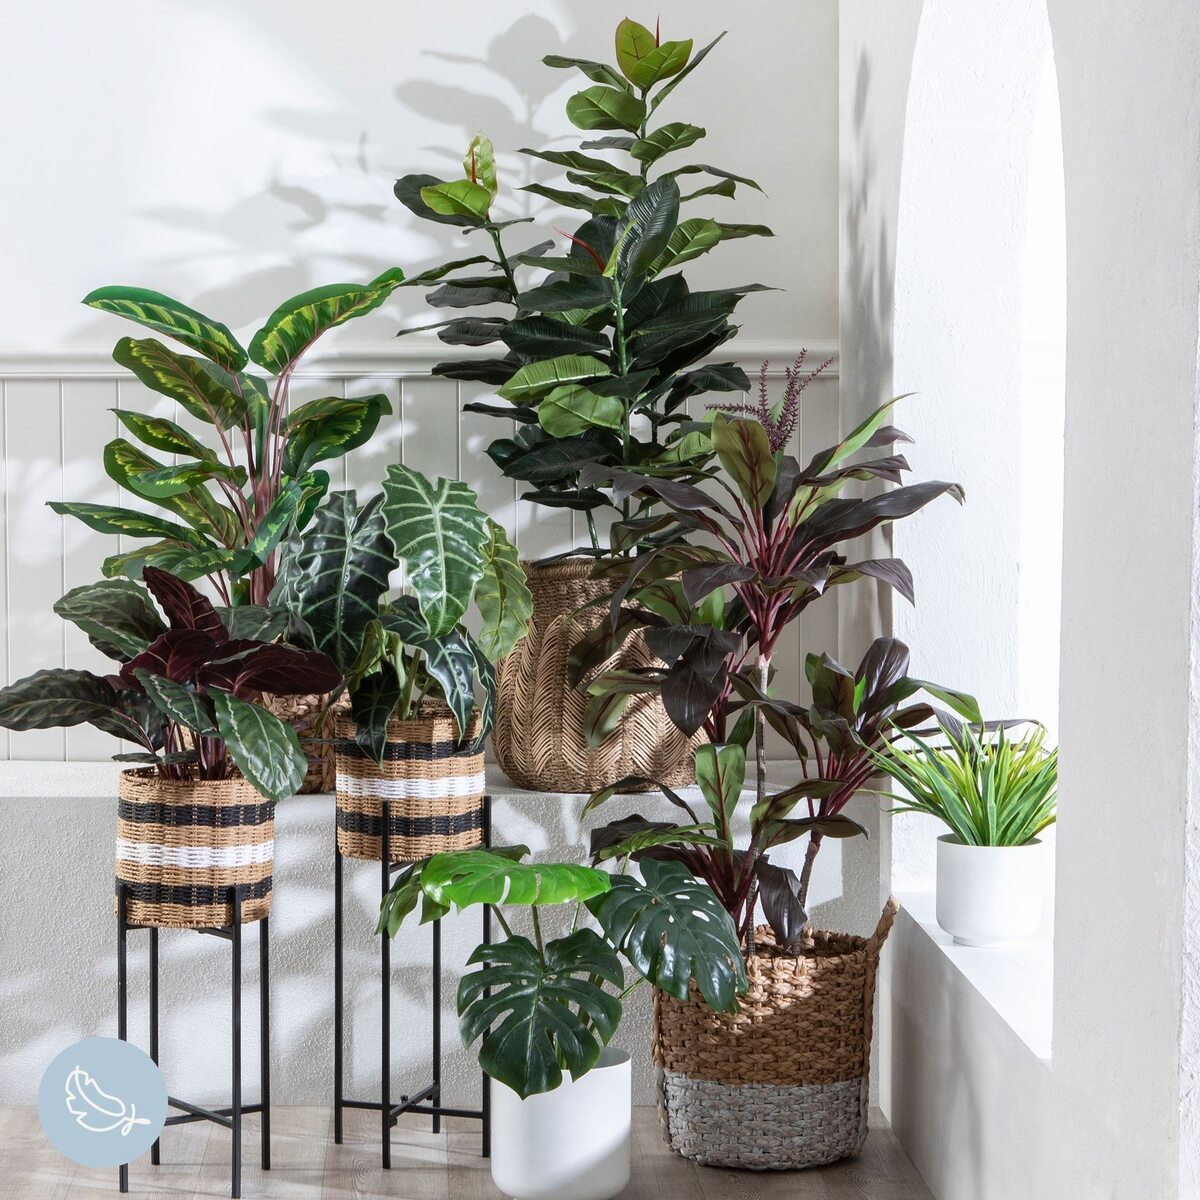 Where To Find Free Artificial Plants For Home Decor